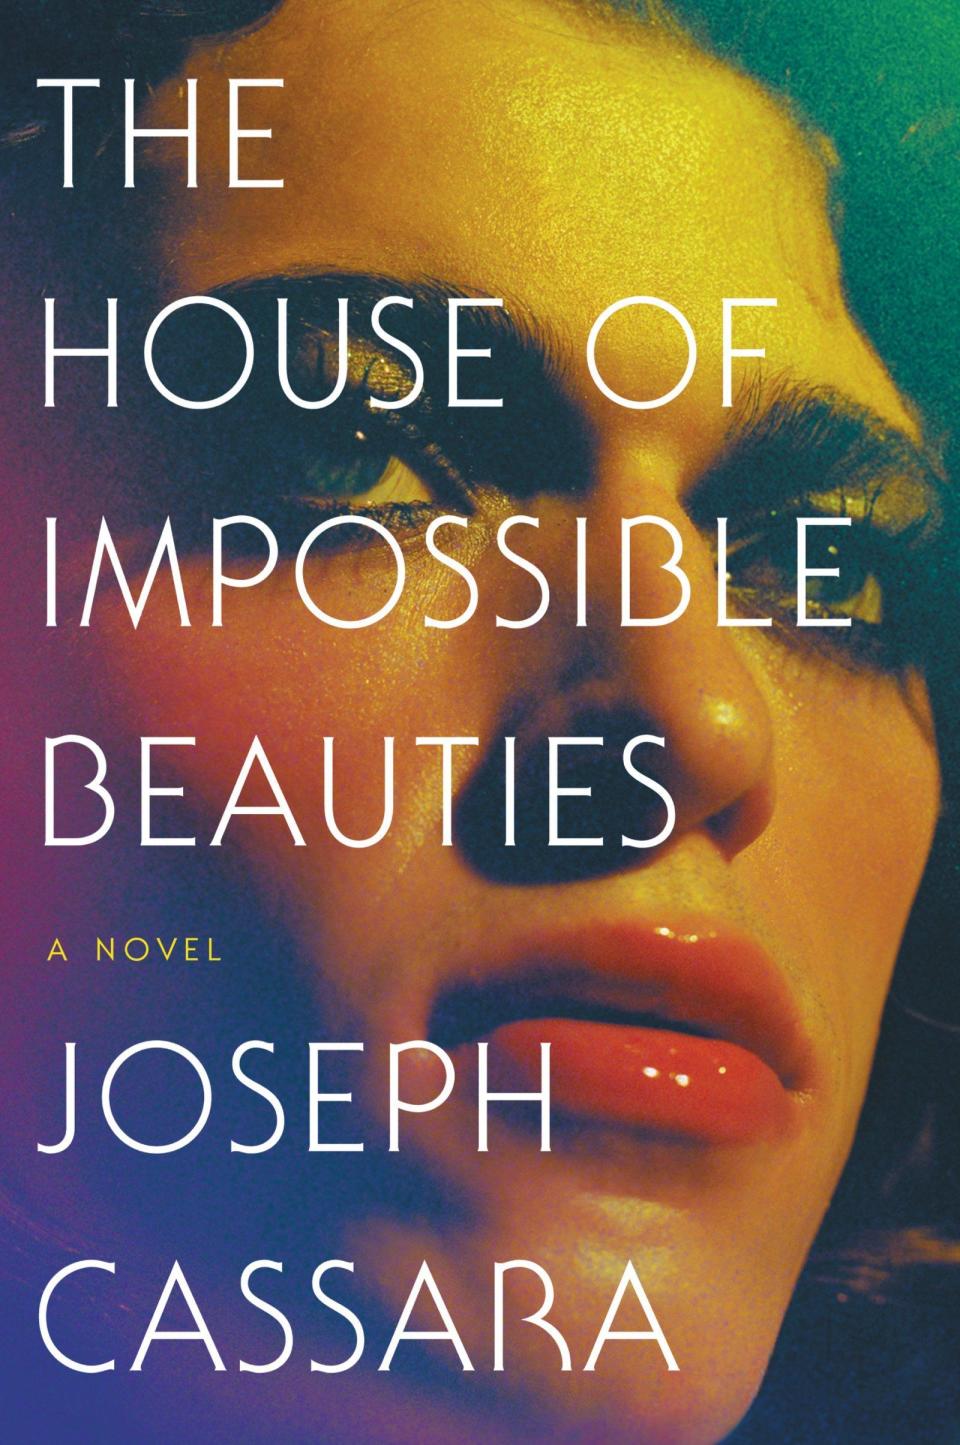 19) <i>The House of Impossible Beauties</i> by Joseph Cassara